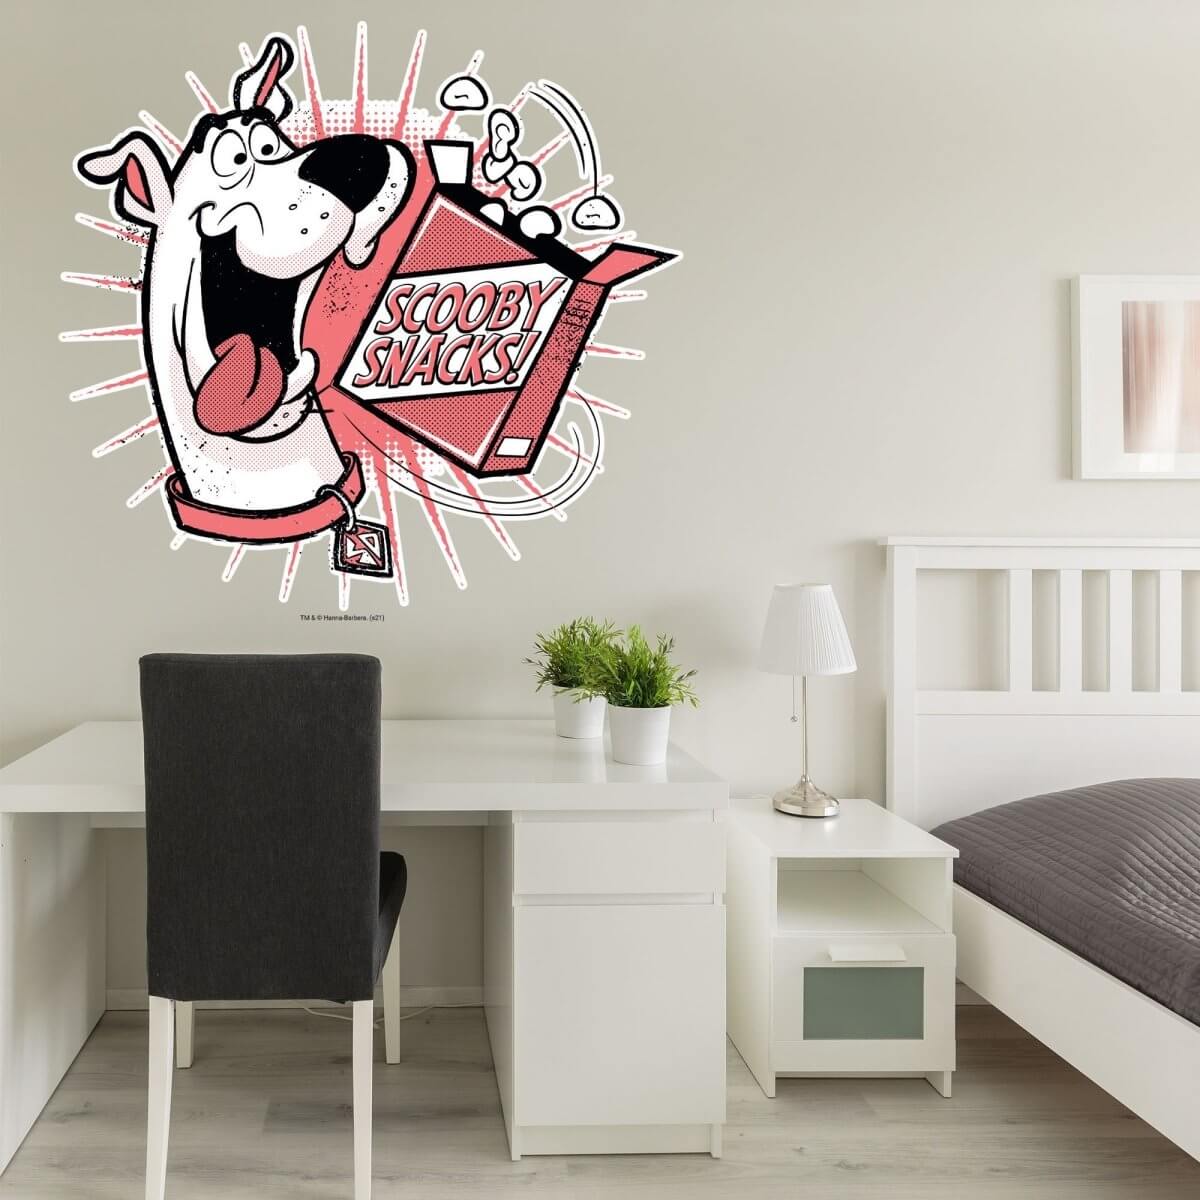 Kismet Decals Home & Room Decor Scooby-Doo Snack Time! Wall decal sticker - officially licensed - latex printed with no solvent odor - Kismet Decals